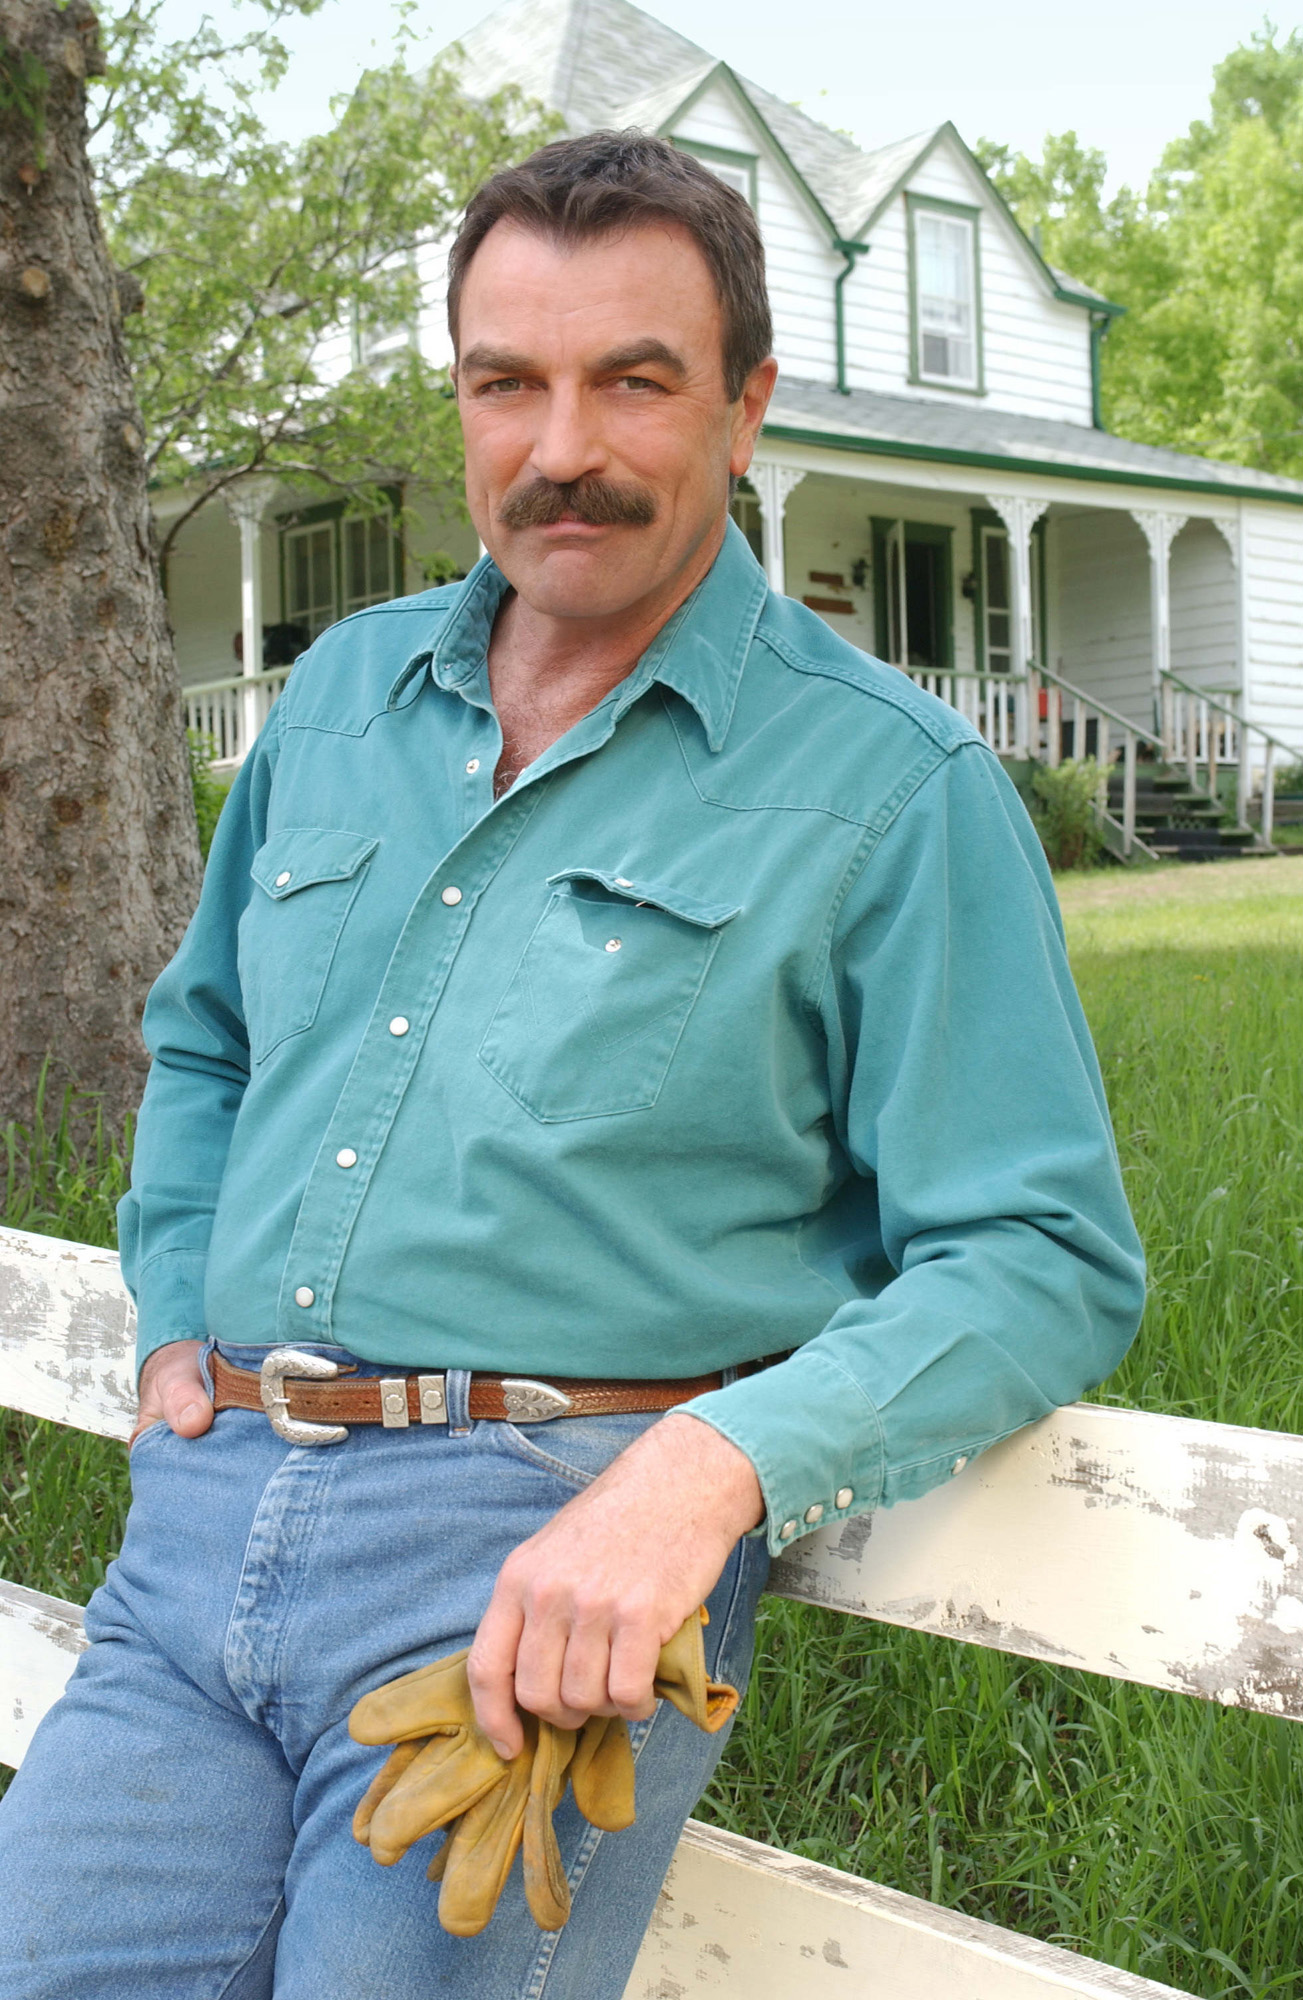 Tom Selleck pictured in the CBS Sunday Movie "Twelve Mile Road" in January 2004 | Source: Getty Images